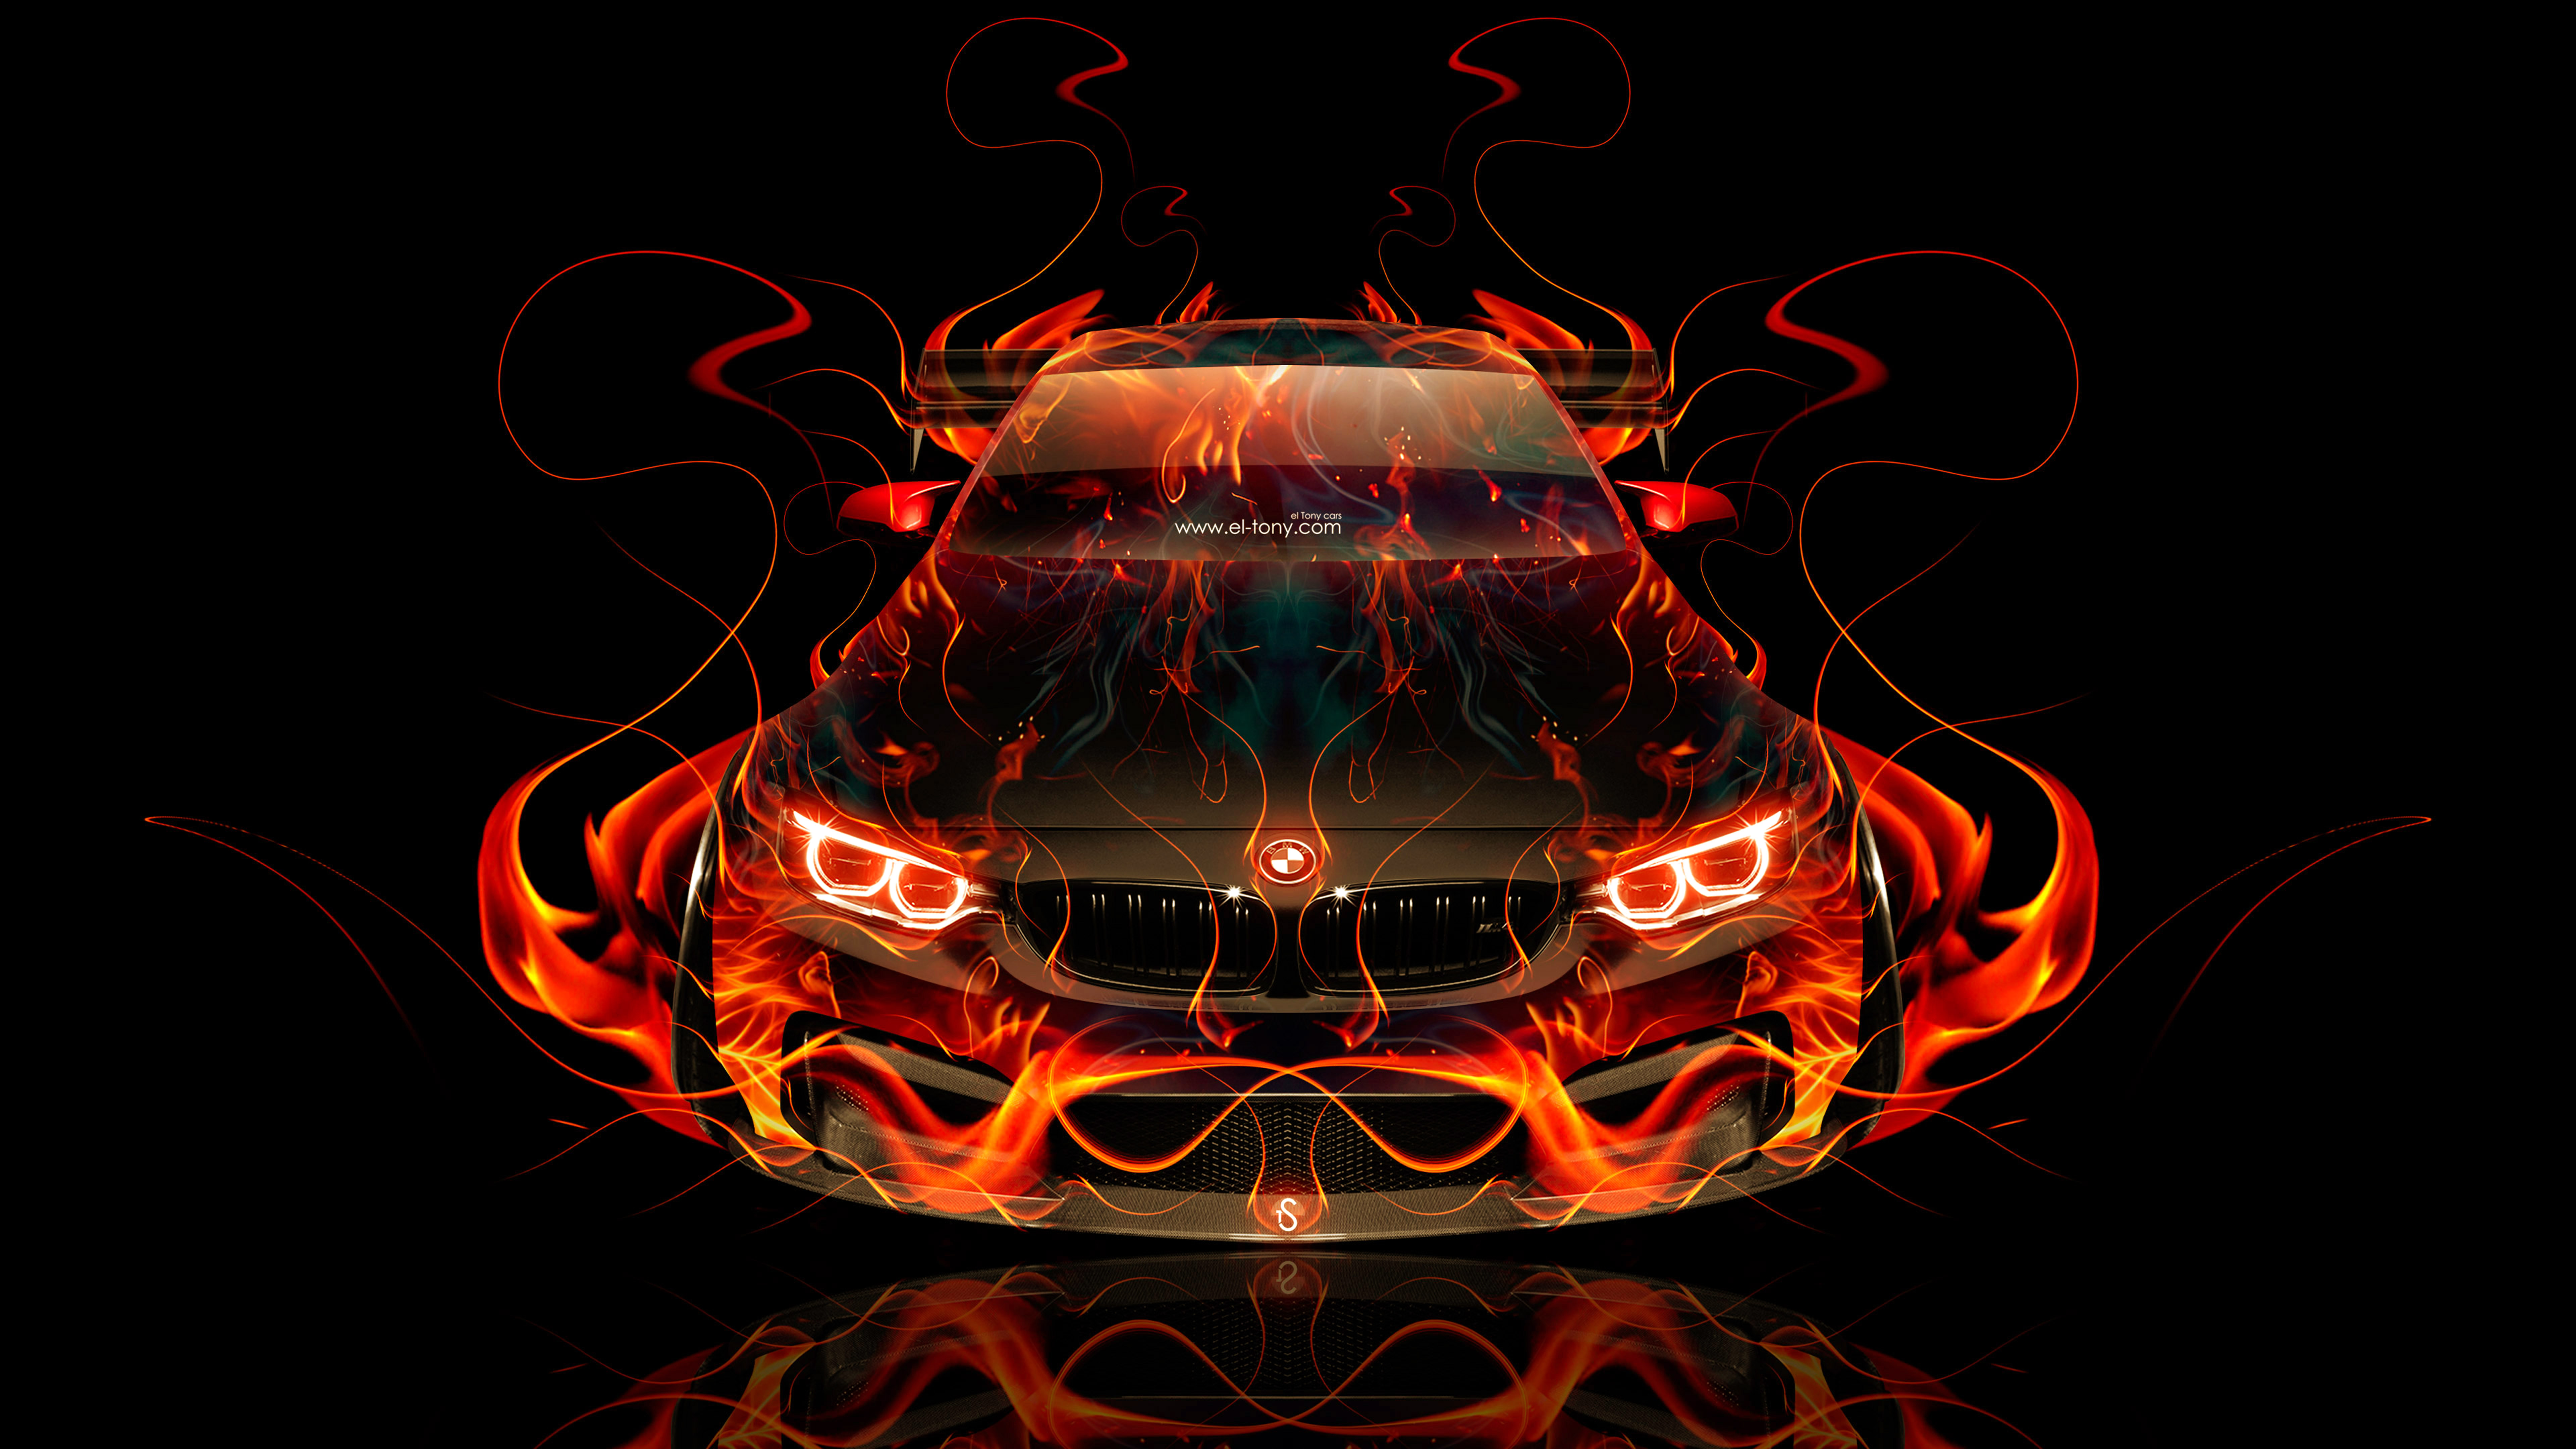 BMW-M4-Tuning-FrontUp-Super-Fire-Flame-Abstract-Art-Car